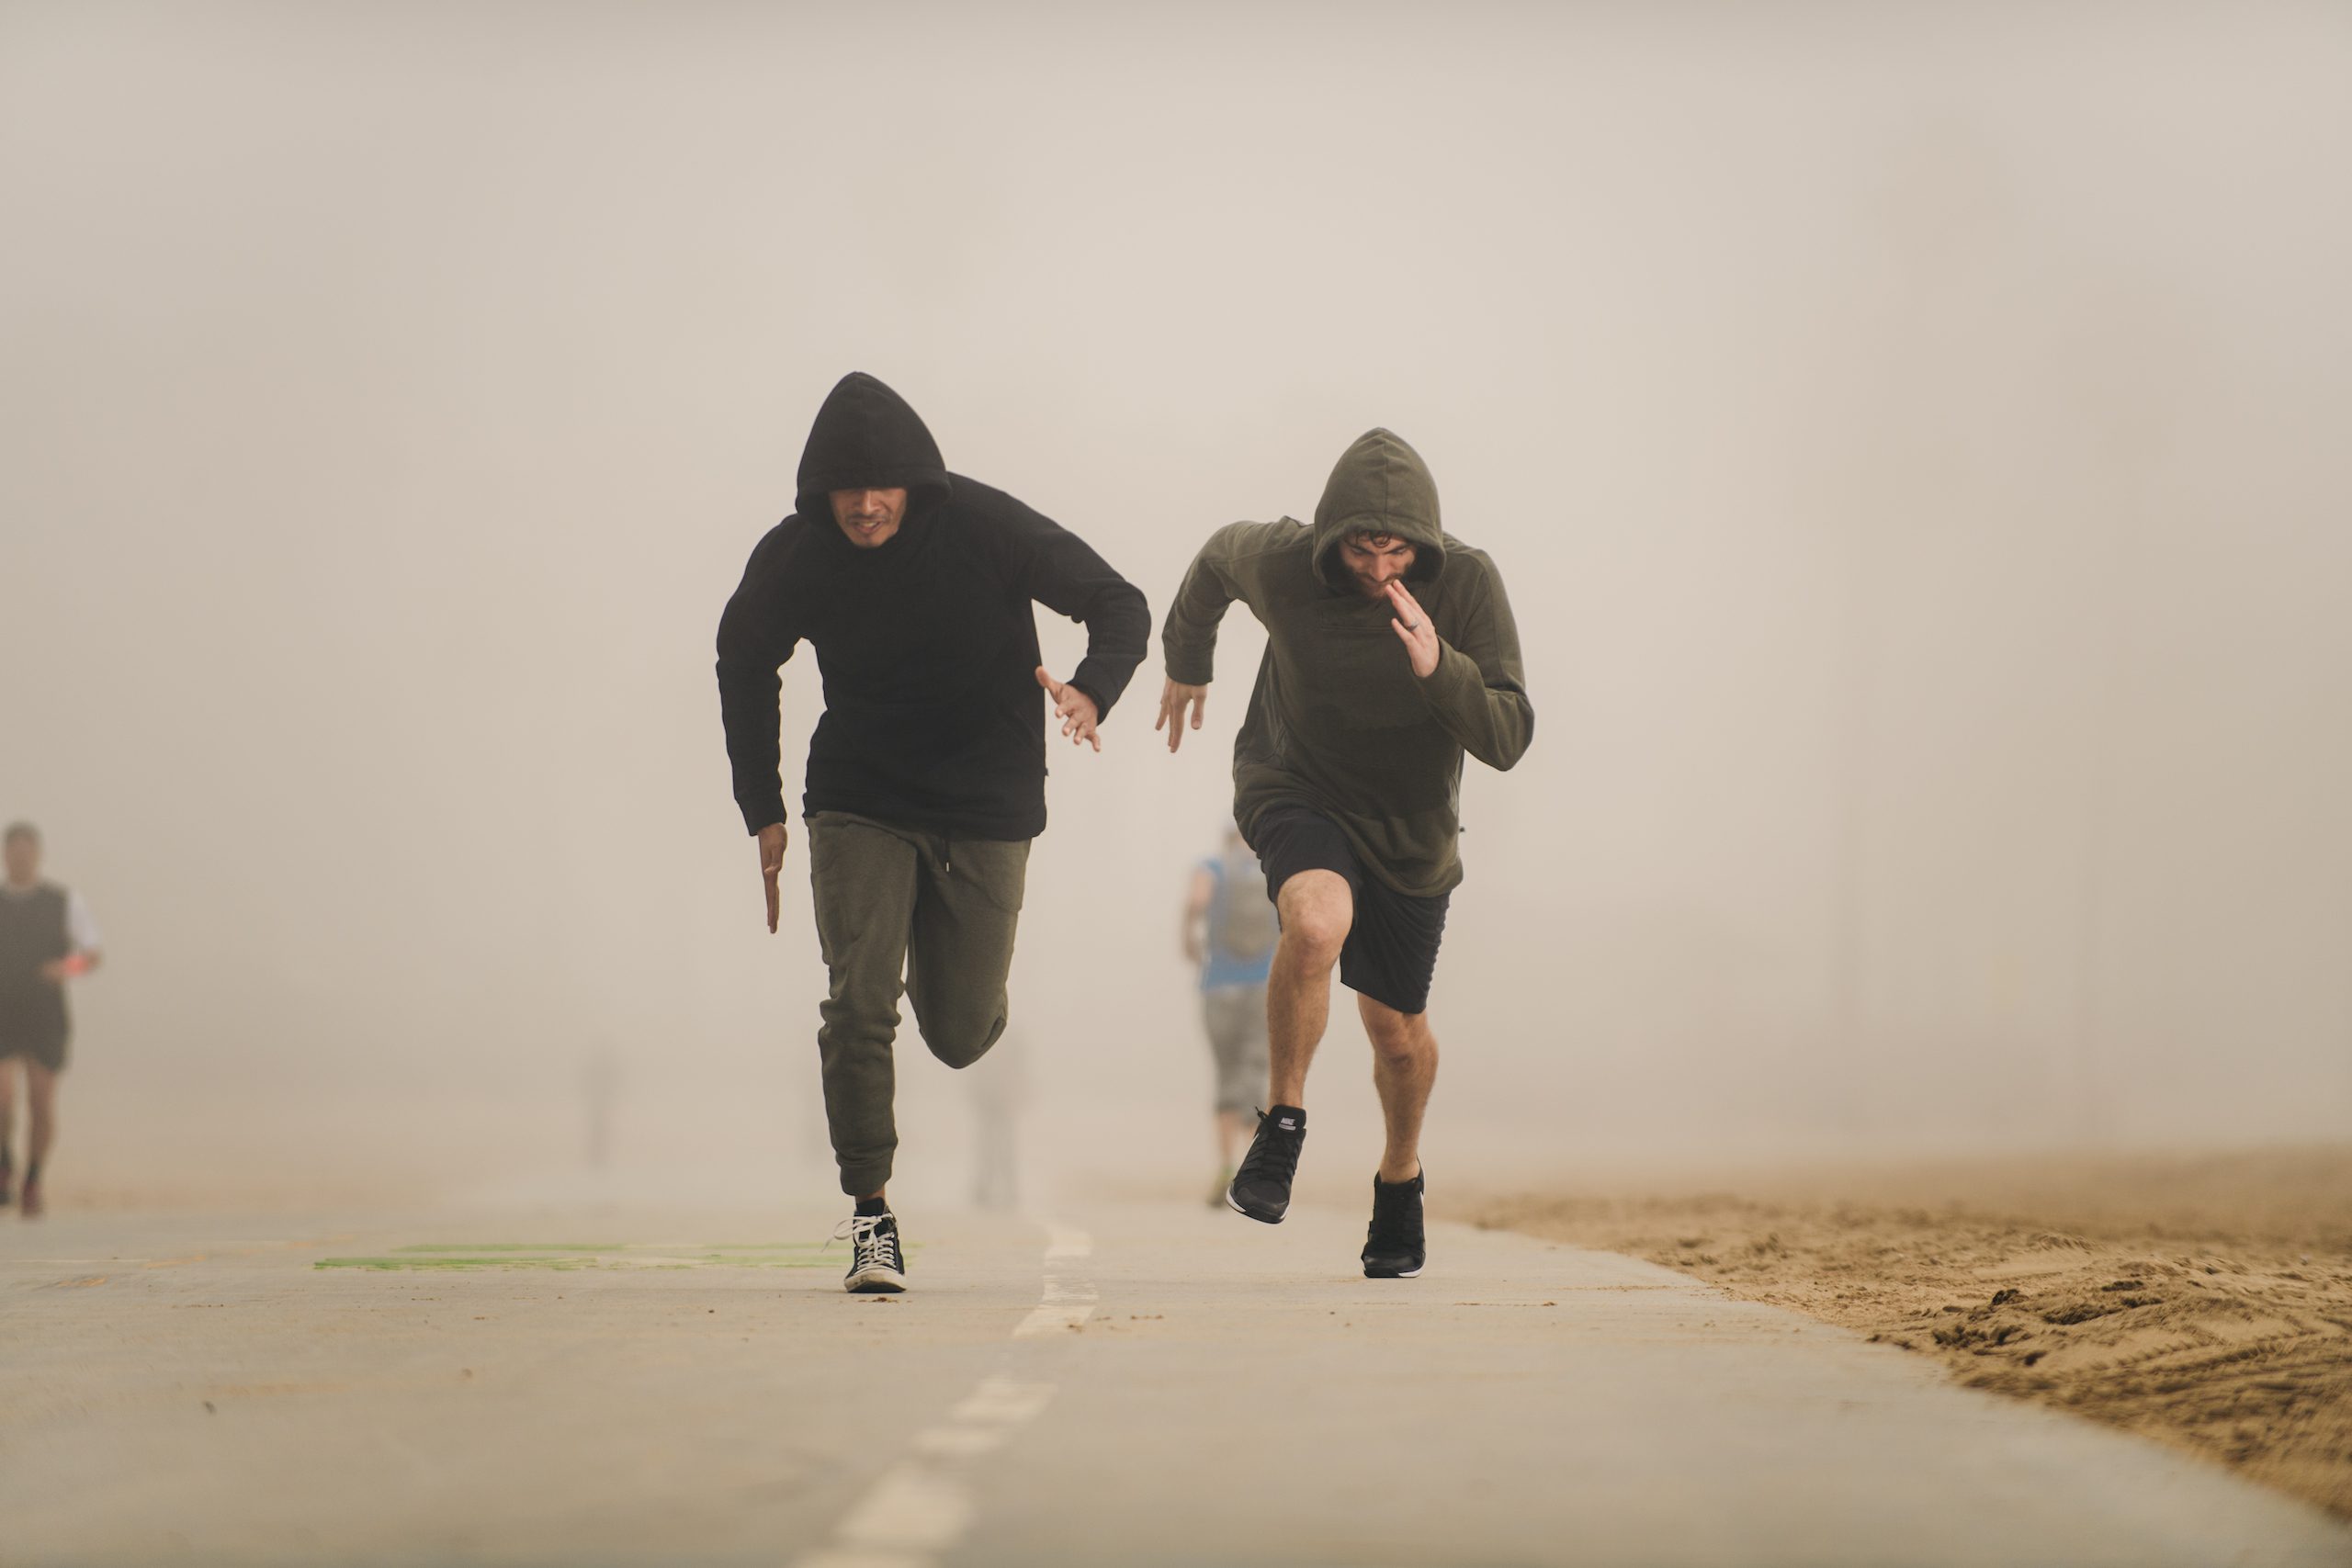 Health and Fitness Marketing Kinetix 365 Beach Exercises Two mean wearing hoodies running down a path